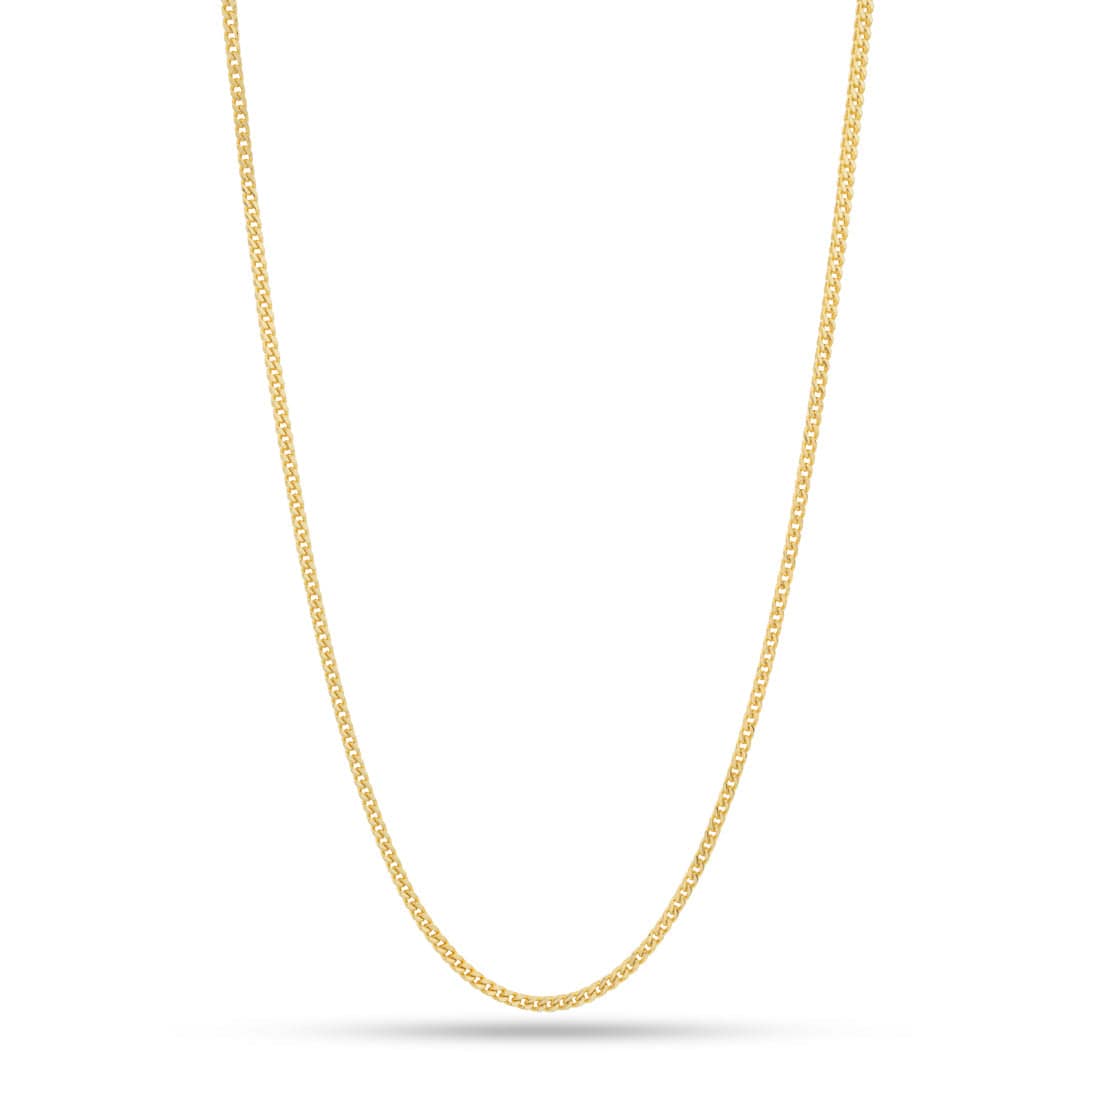 Solid Gold 3mm Franco Chain  in  14K Gold / 16" Mens Chains